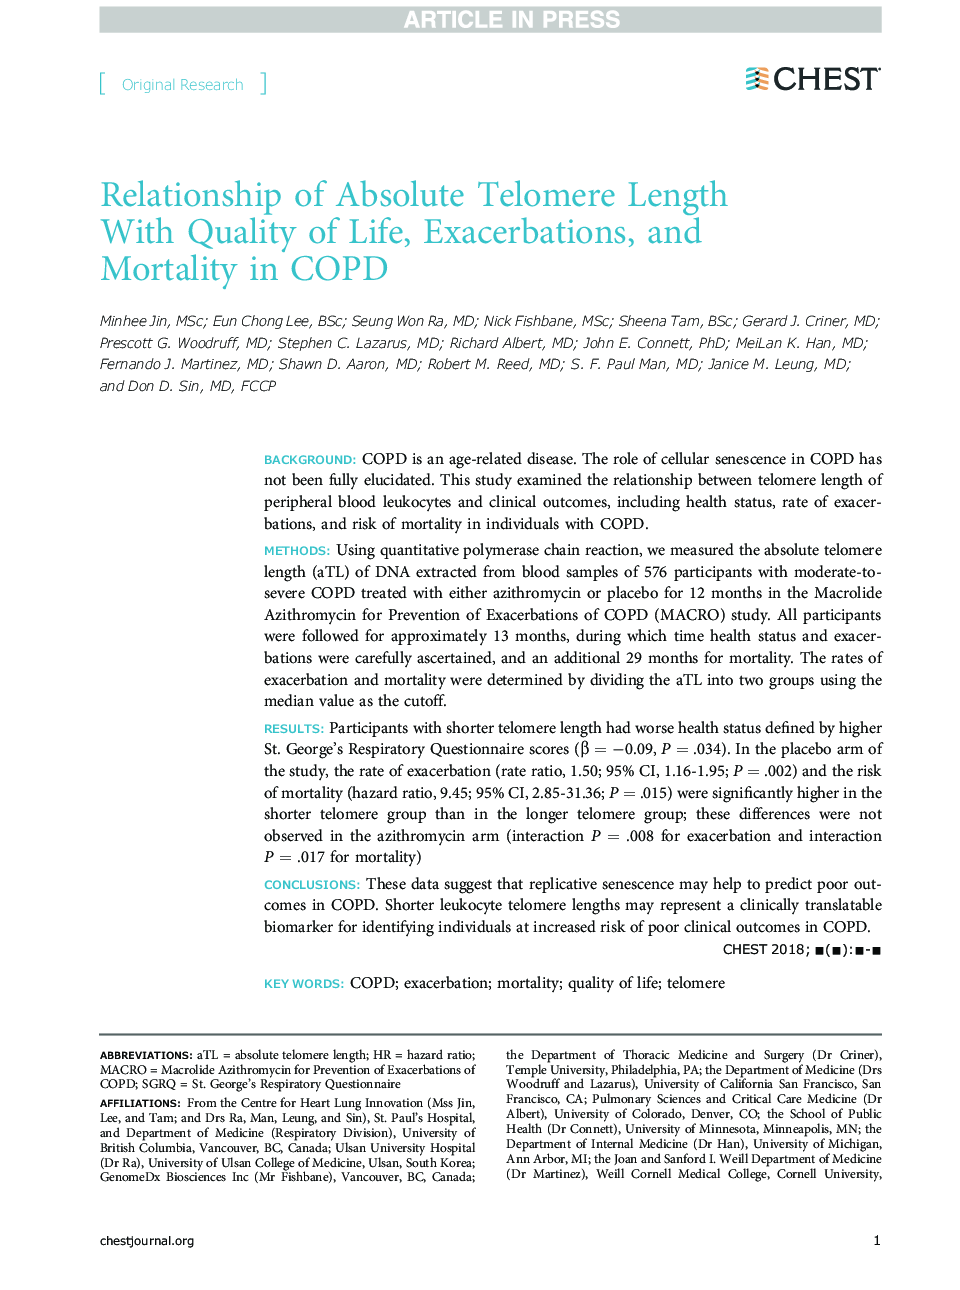 Relationship of Absolute Telomere Length With Quality of Life, Exacerbations, and Mortality in COPD